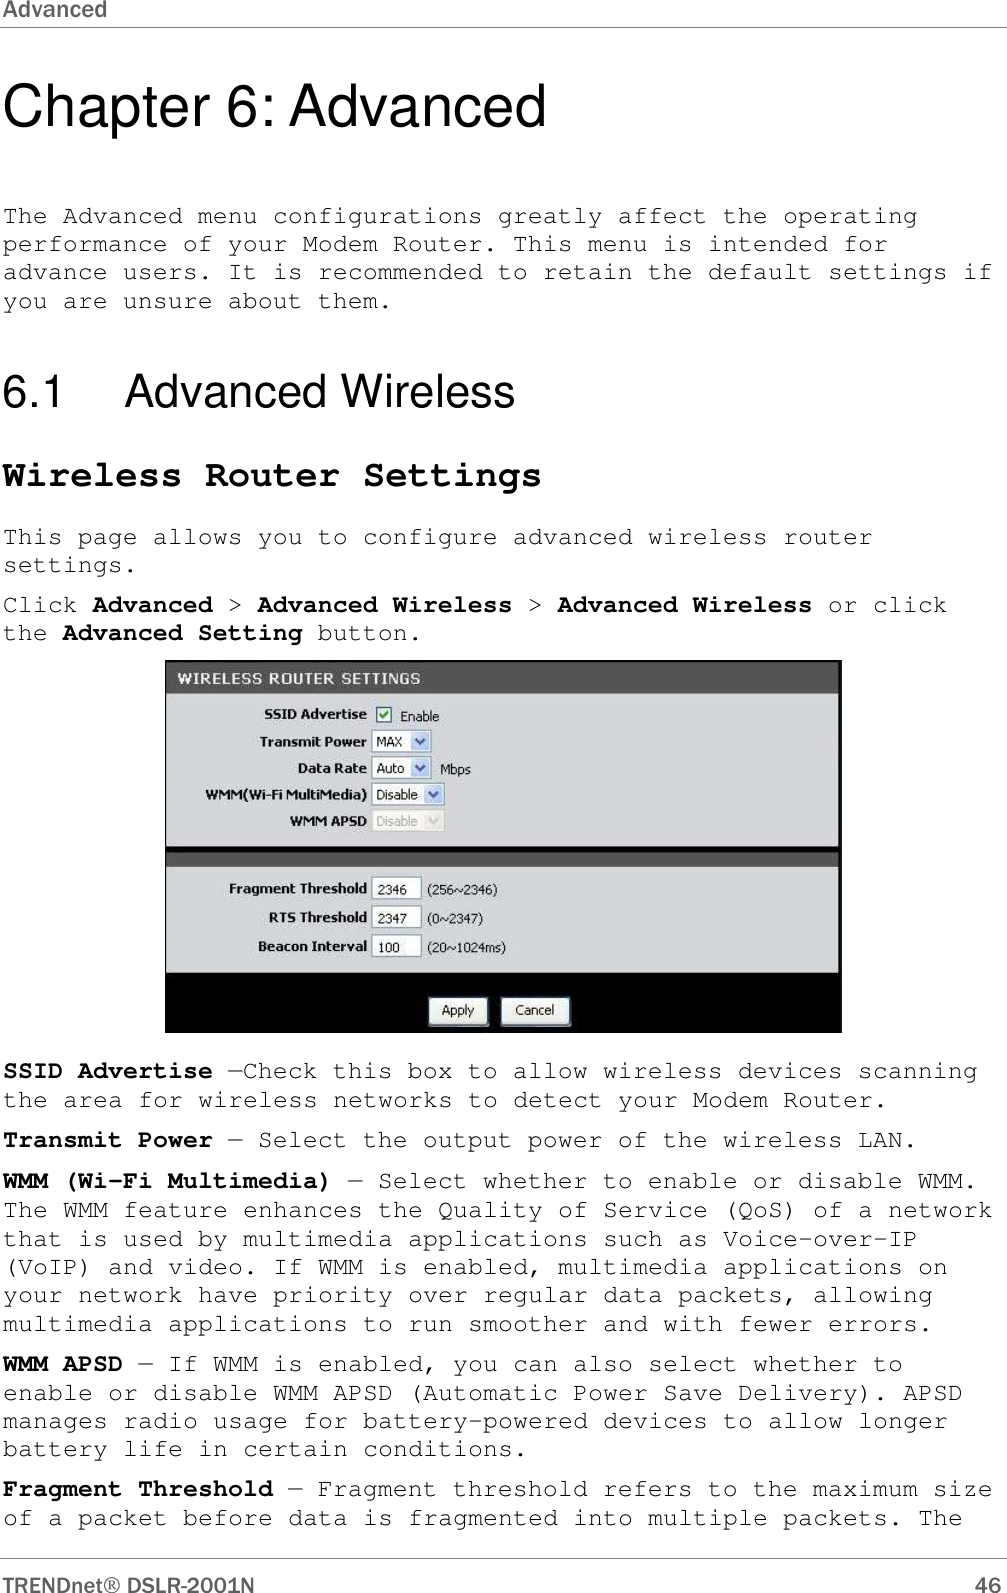 Advanced      TRENDnet DSLR-2001N        46 Chapter 6: Advanced The Advanced menu configurations greatly affect the operating performance of your Modem Router. This menu is intended for advance users. It is recommended to retain the default settings if you are unsure about them. 6.1  Advanced Wireless Wireless Router Settings This page allows you to configure advanced wireless router settings. Click Advanced &gt; Advanced Wireless &gt; Advanced Wireless or click the Advanced Setting button.  SSID Advertise —Check this box to allow wireless devices scanning the area for wireless networks to detect your Modem Router. Transmit Power — Select the output power of the wireless LAN. WMM (Wi-Fi Multimedia) — Select whether to enable or disable WMM. The WMM feature enhances the Quality of Service (QoS) of a network that is used by multimedia applications such as Voice-over-IP (VoIP) and video. If WMM is enabled, multimedia applications on your network have priority over regular data packets, allowing multimedia applications to run smoother and with fewer errors.  WMM APSD — If WMM is enabled, you can also select whether to enable or disable WMM APSD (Automatic Power Save Delivery). APSD manages radio usage for battery-powered devices to allow longer battery life in certain conditions. Fragment Threshold — Fragment threshold refers to the maximum size of a packet before data is fragmented into multiple packets. The 